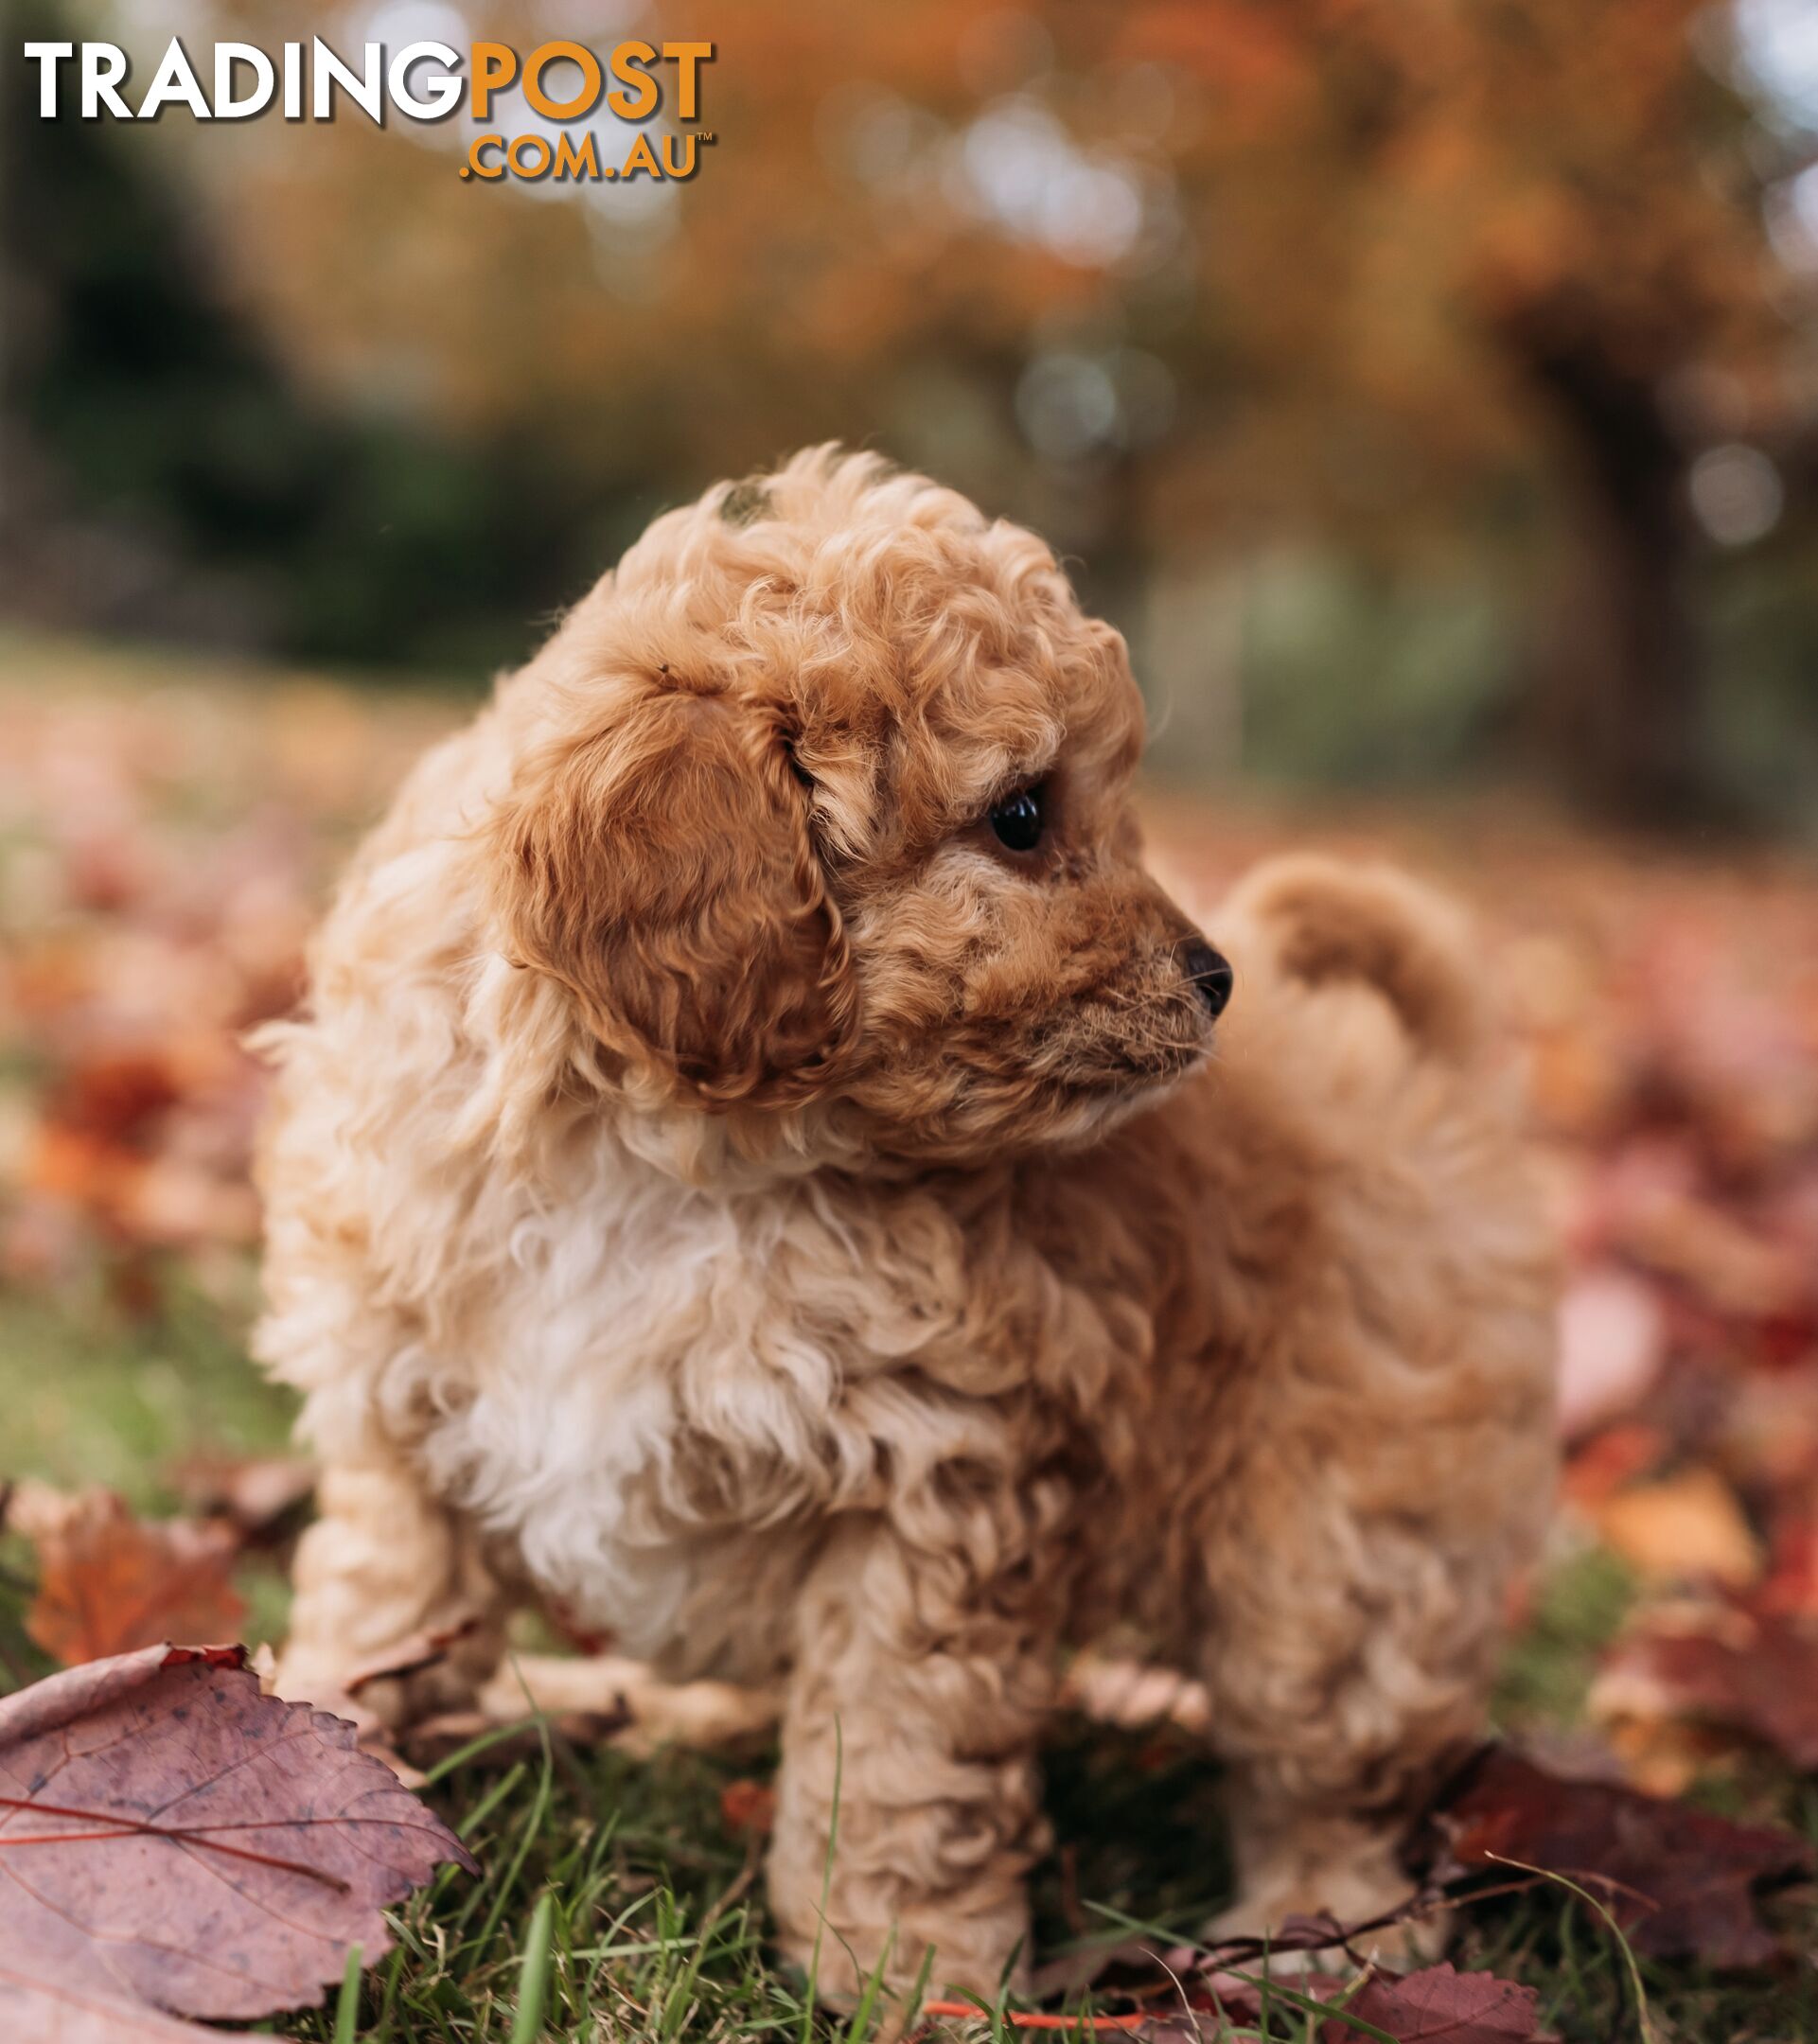 Stunning Cavoodle puppies 8 weeks old and ready for their new homes!